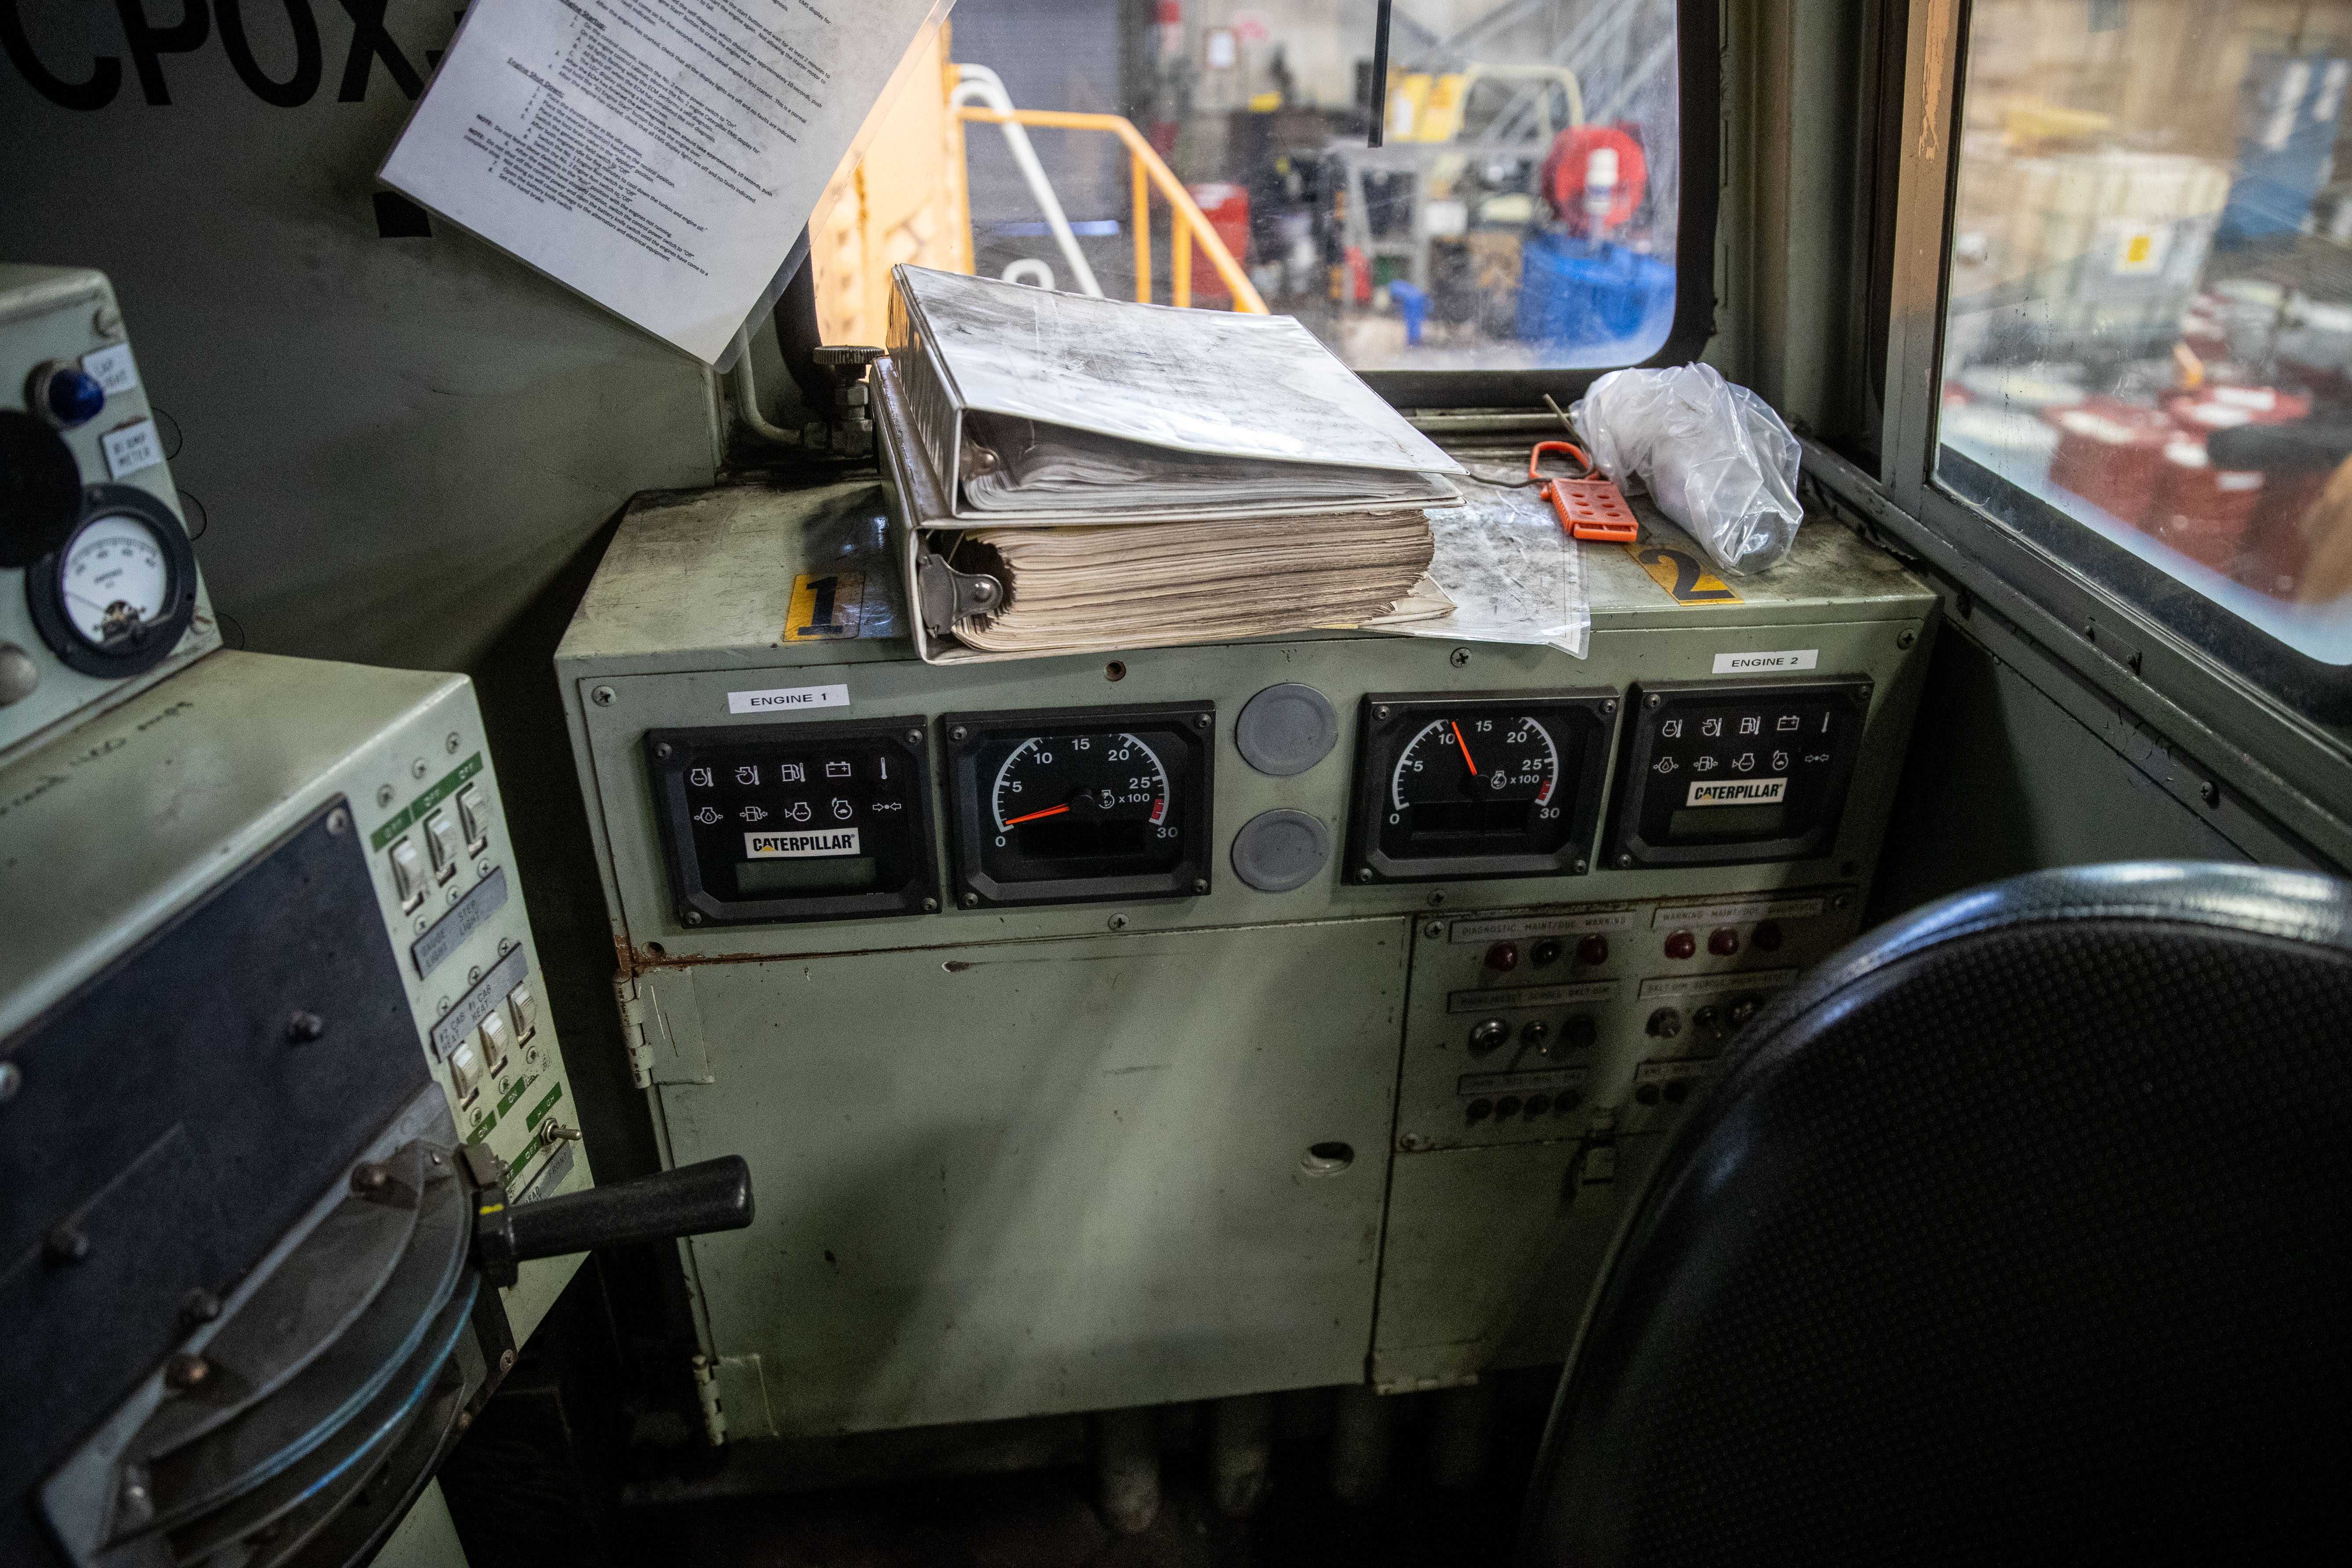 Inside a 1979 GE diesel train locomotive at the Consumers Energy J.H. Campbell plant in Port Sheldon Township on Monday, Feb. 13, 2023. Consumers Energy is donating the locomotive to the Coopersville and Marne Railway. (Cory Morse | MLive.com)